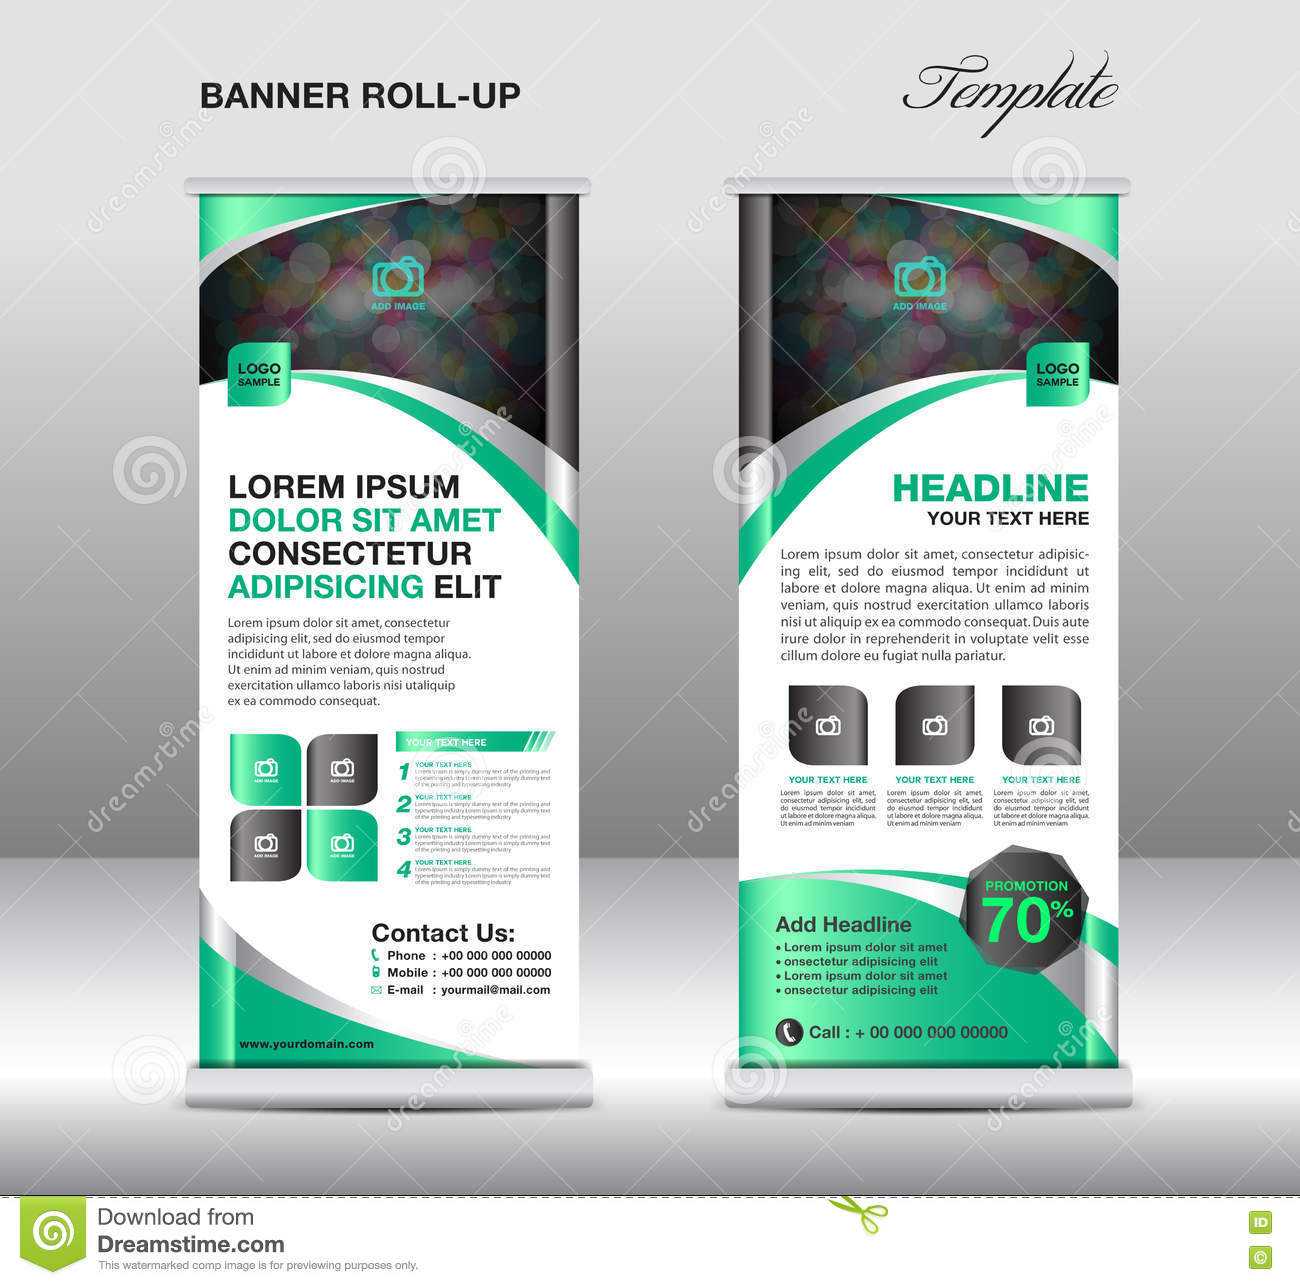 Roll Up Banner Stand Template, Stand Design,banner Template Intended For Banner Stand Design Templates